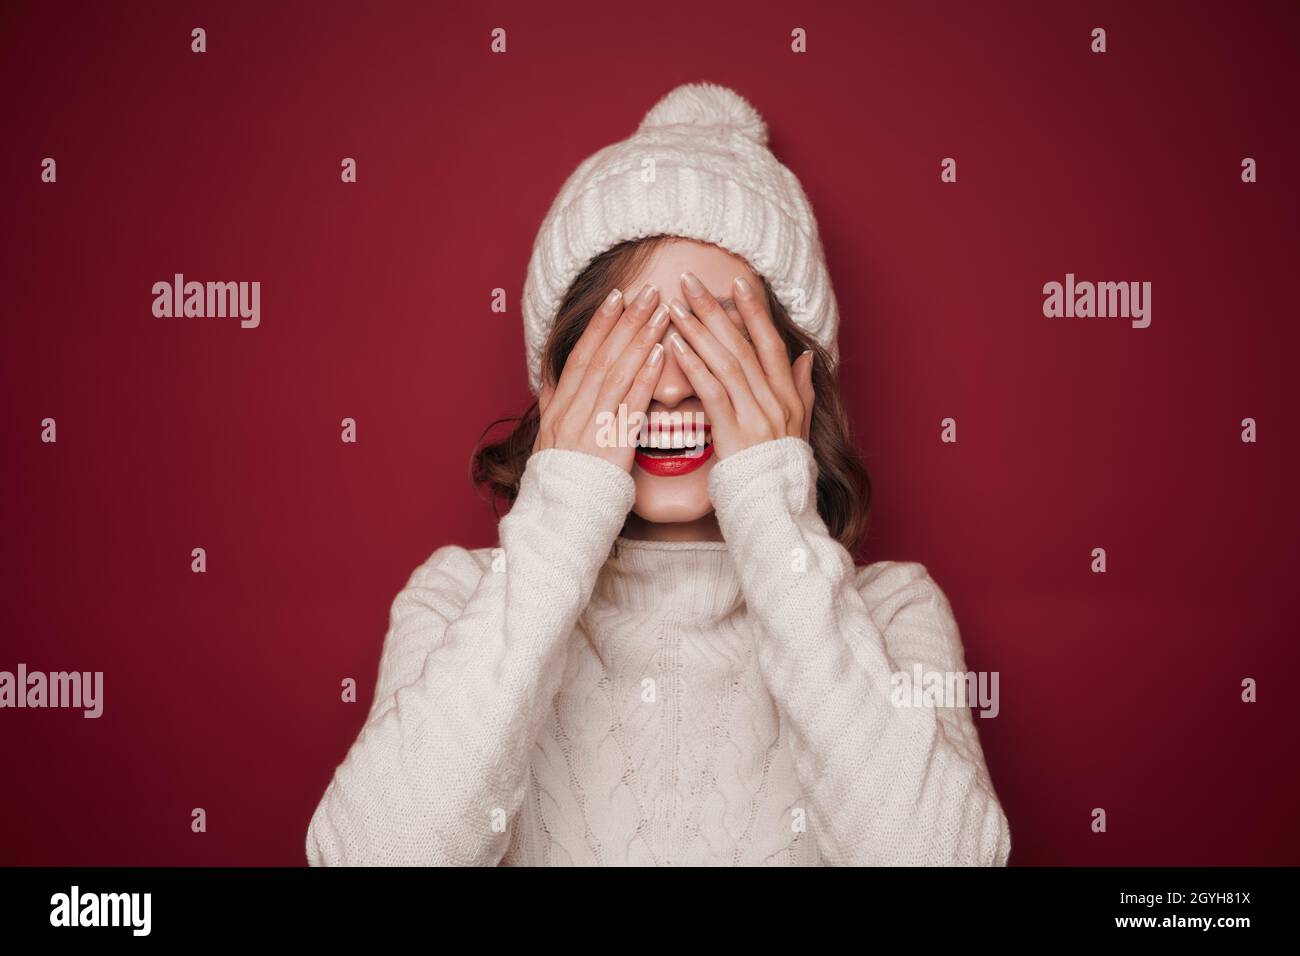 Cheerful smiling woman in sweater cover her eyes Stock Photo